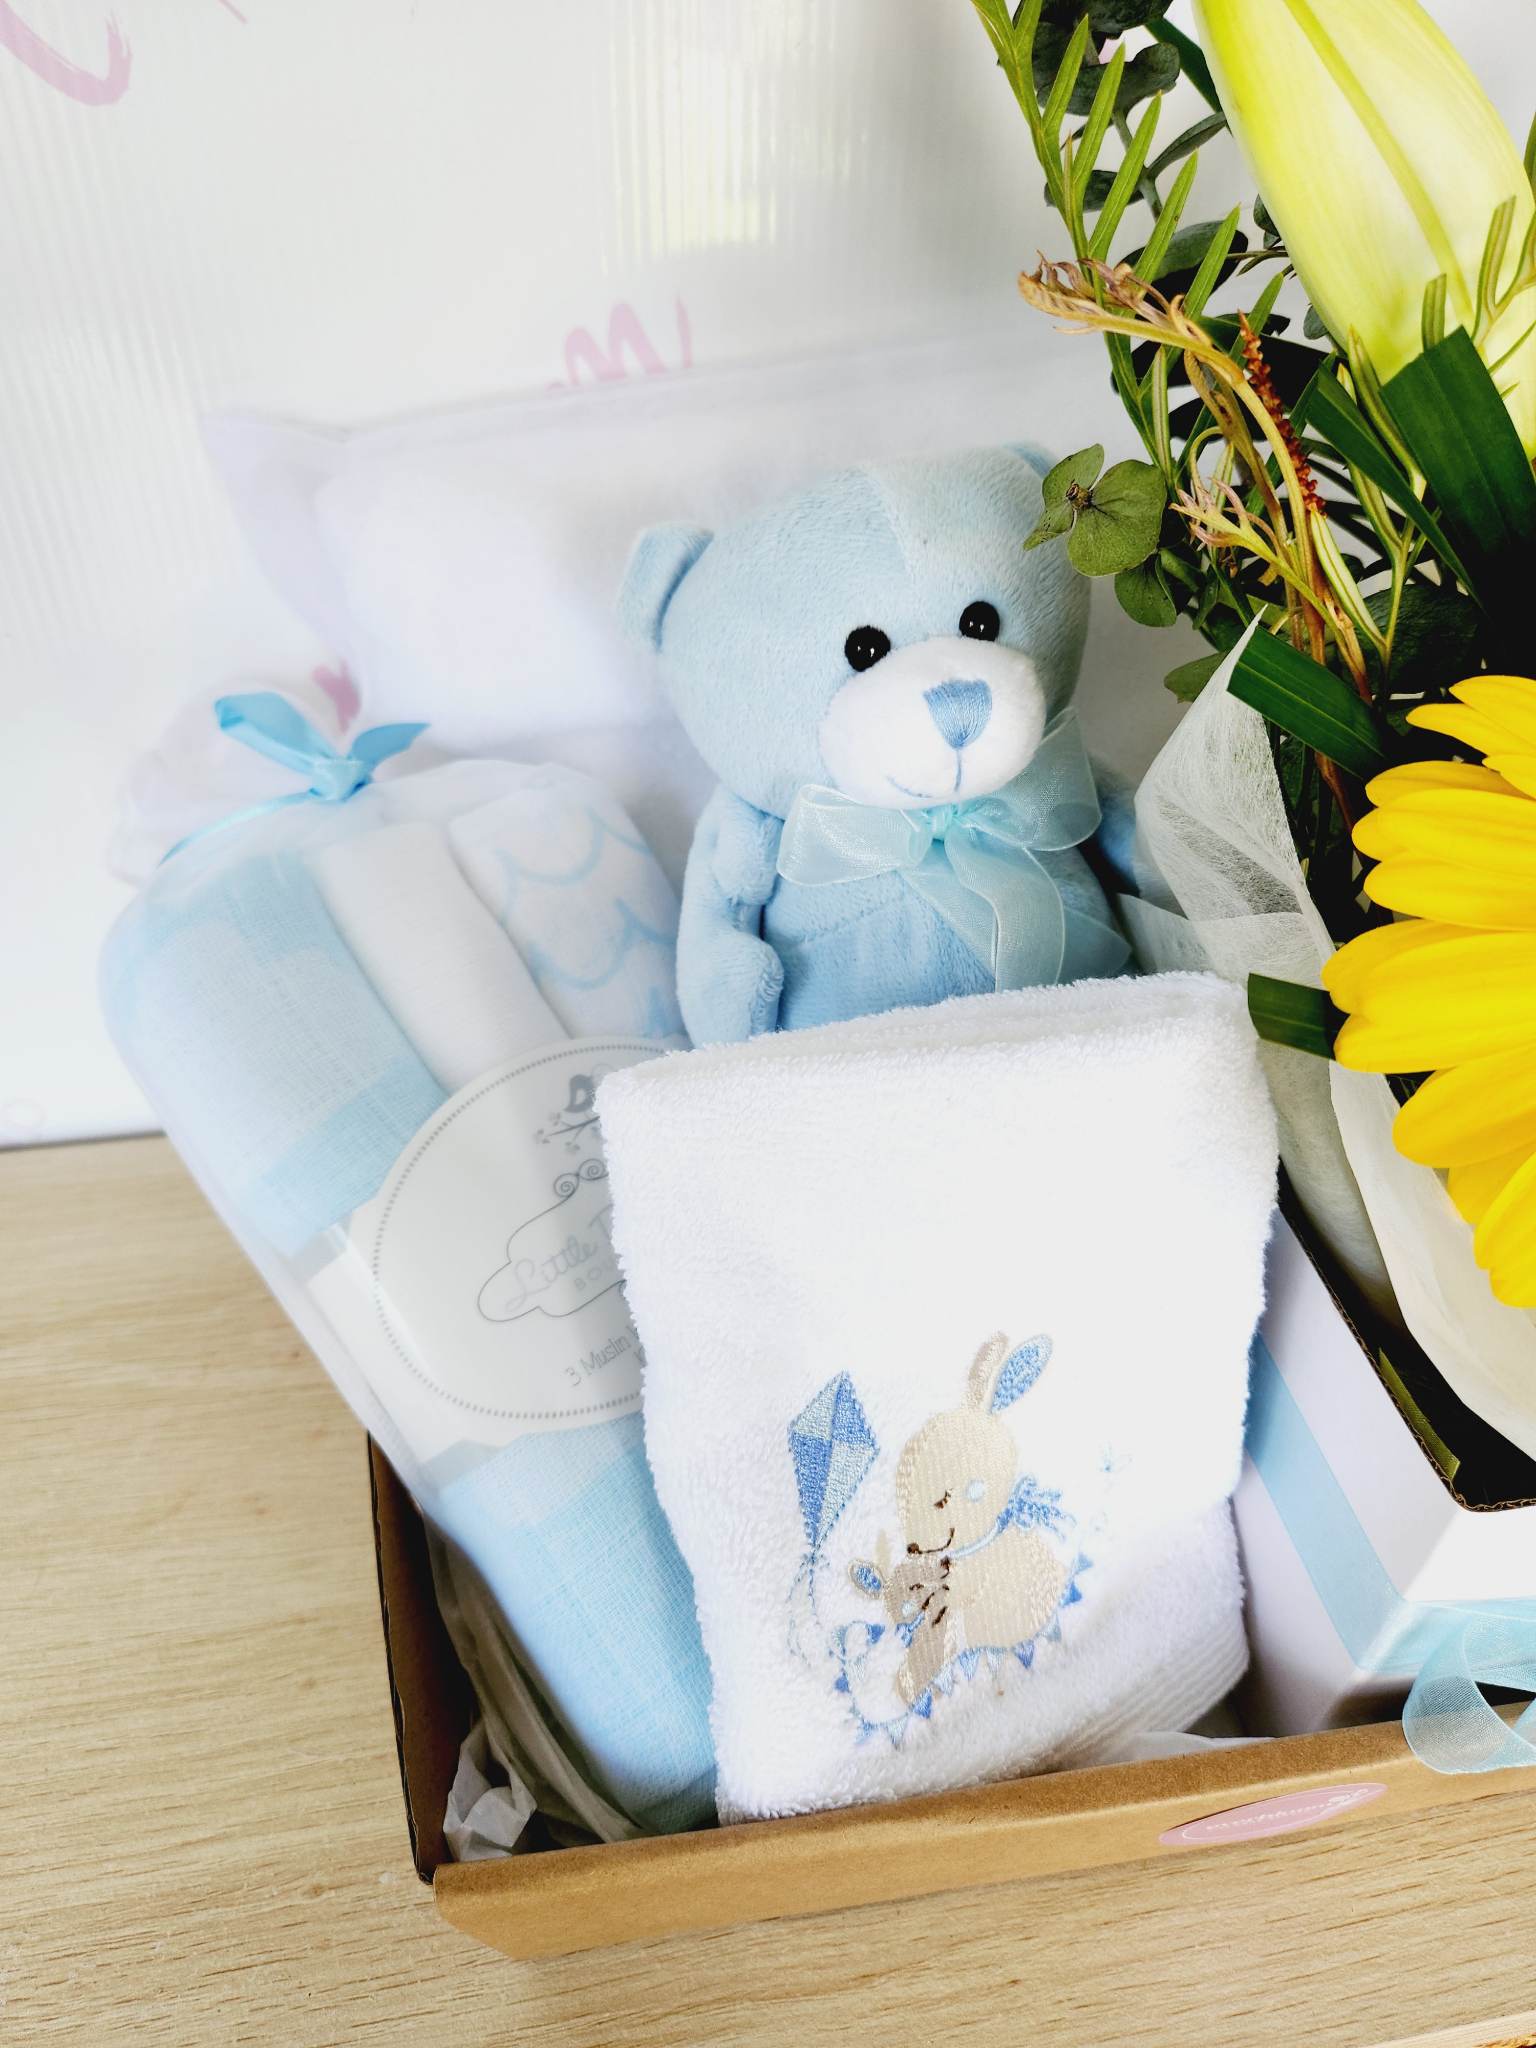 Baby gift hamper for new born baby - Everbloom Floral Studio - Mount Maunganui and Papamoa Florist